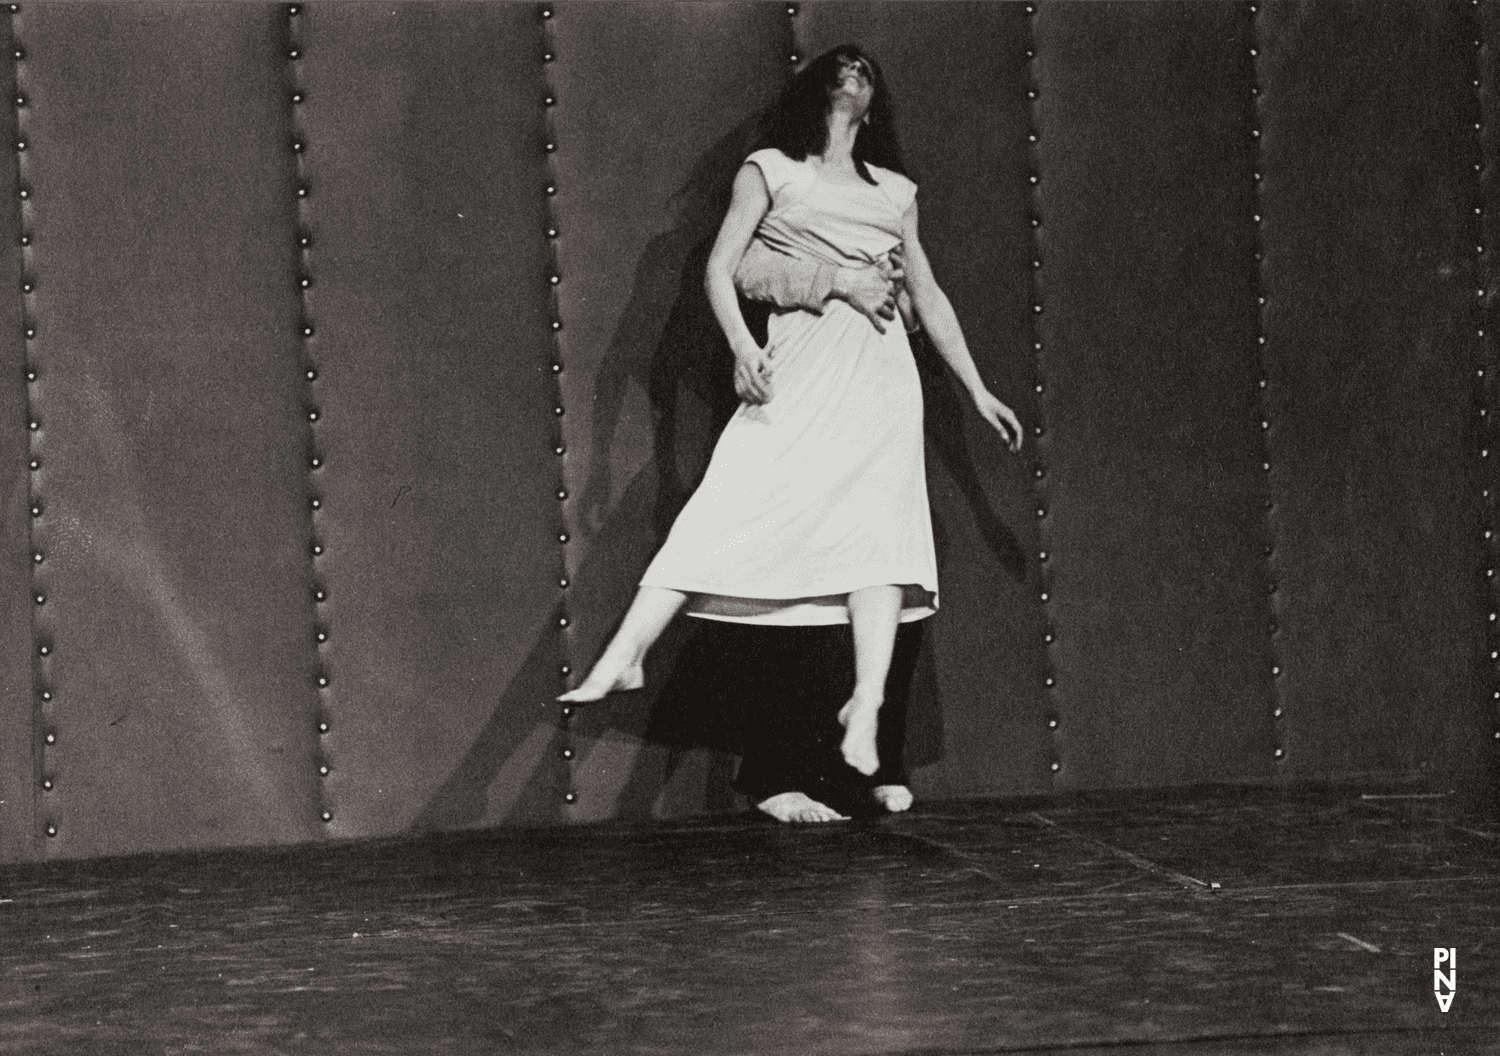 Malou Airaudo and Dominique Mercy in “Café Müller” by Pina Bausch